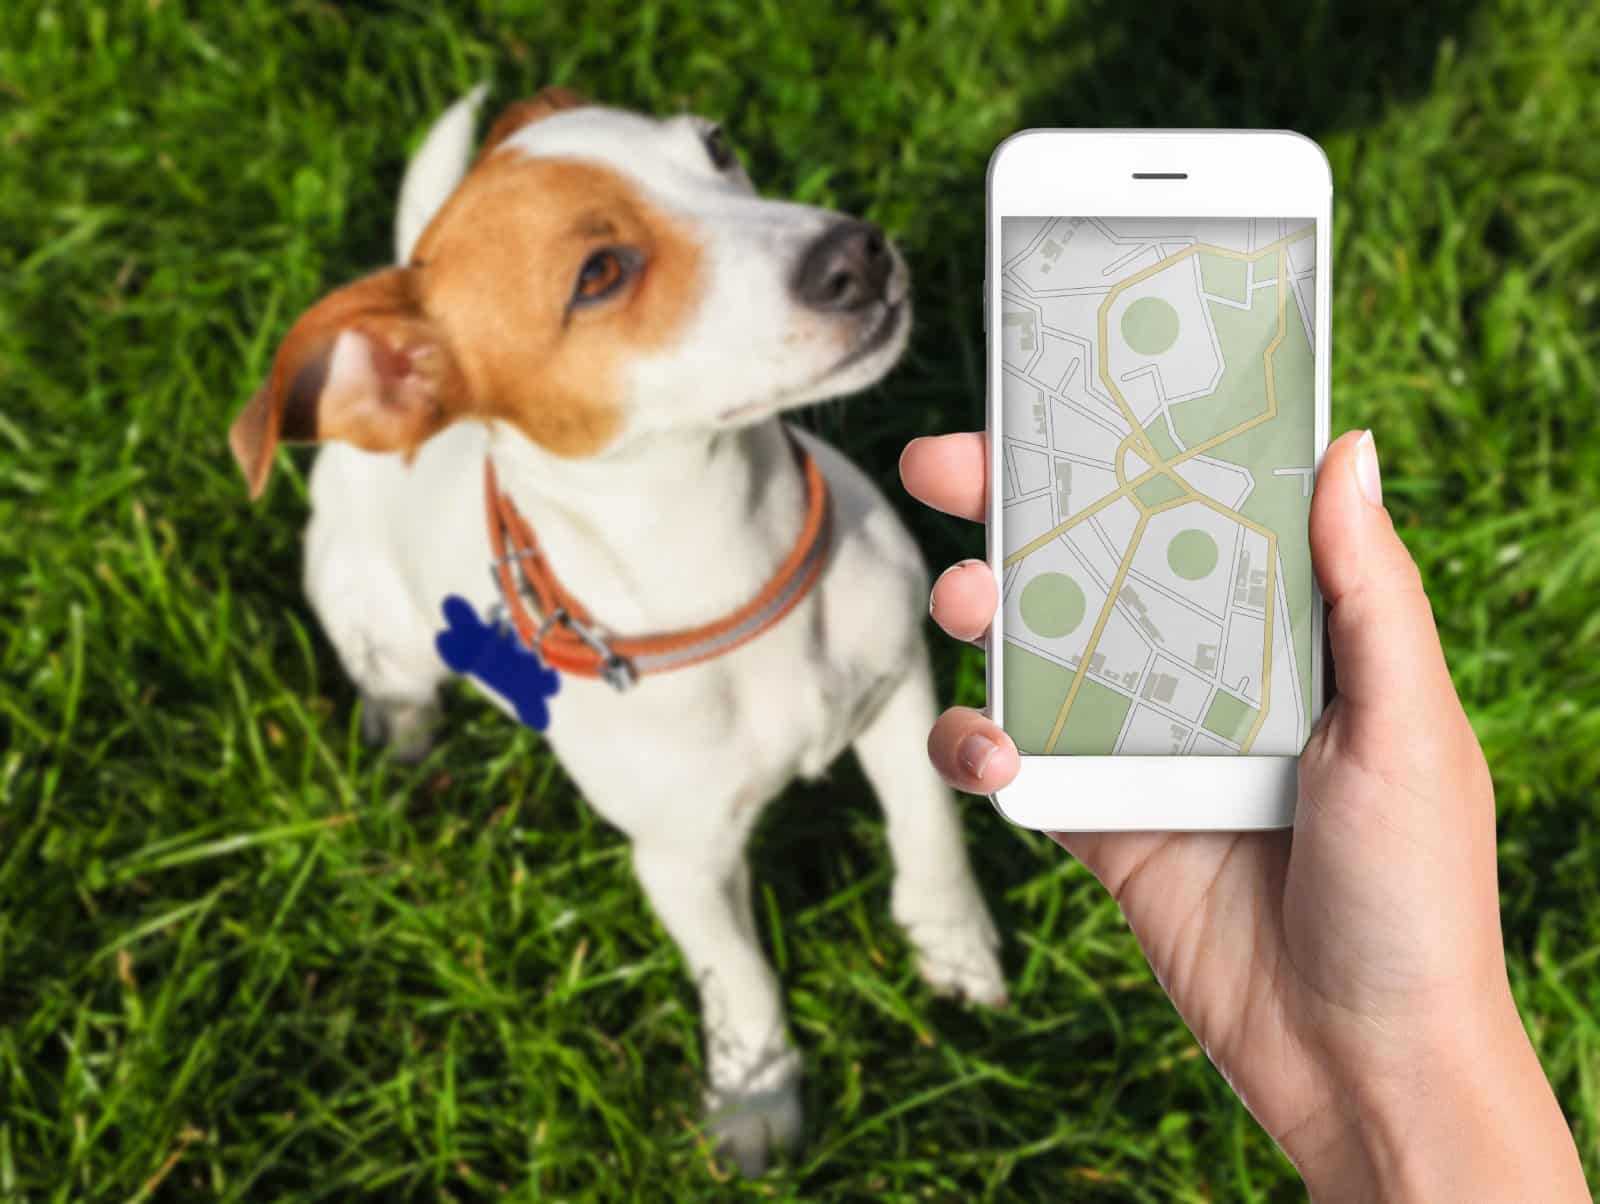 <p class="wp-caption-text">Image Credit: Shutterstock / New Africa</p>  <p><span>Ensure your pet’s ID tags are up-to-date and consider microchipping. It’s like “Find My iPhone,” but for your pet.</span></p>